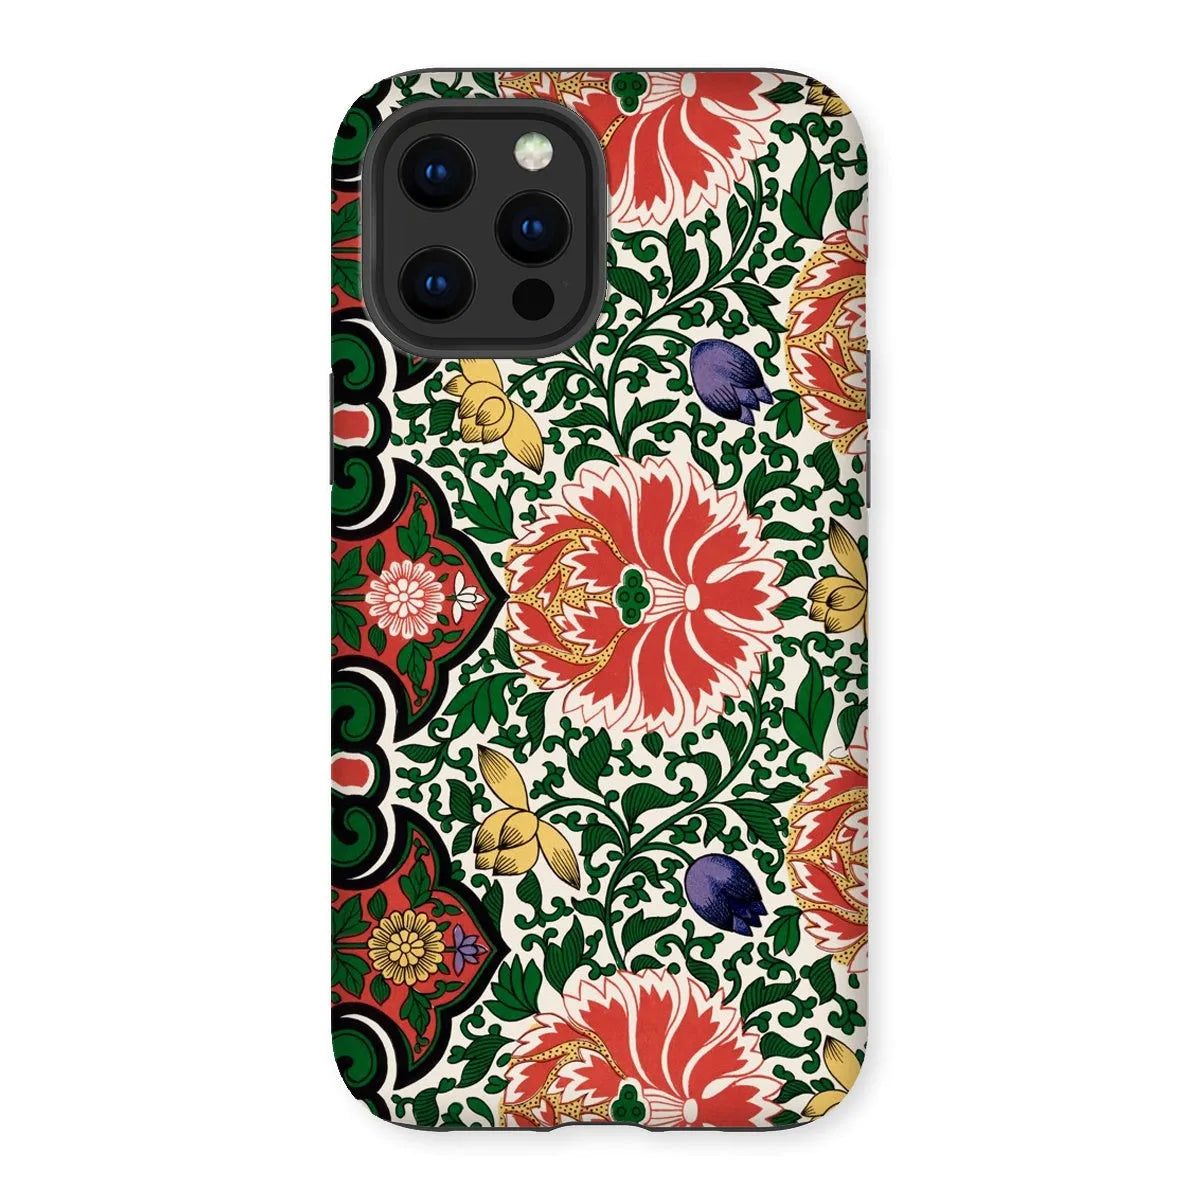 Chinese Floral Pattern Aesthetic Art Phone Case - Owen Jones - Iphone 12 Pro Max / Matte - Mobile Phone Cases